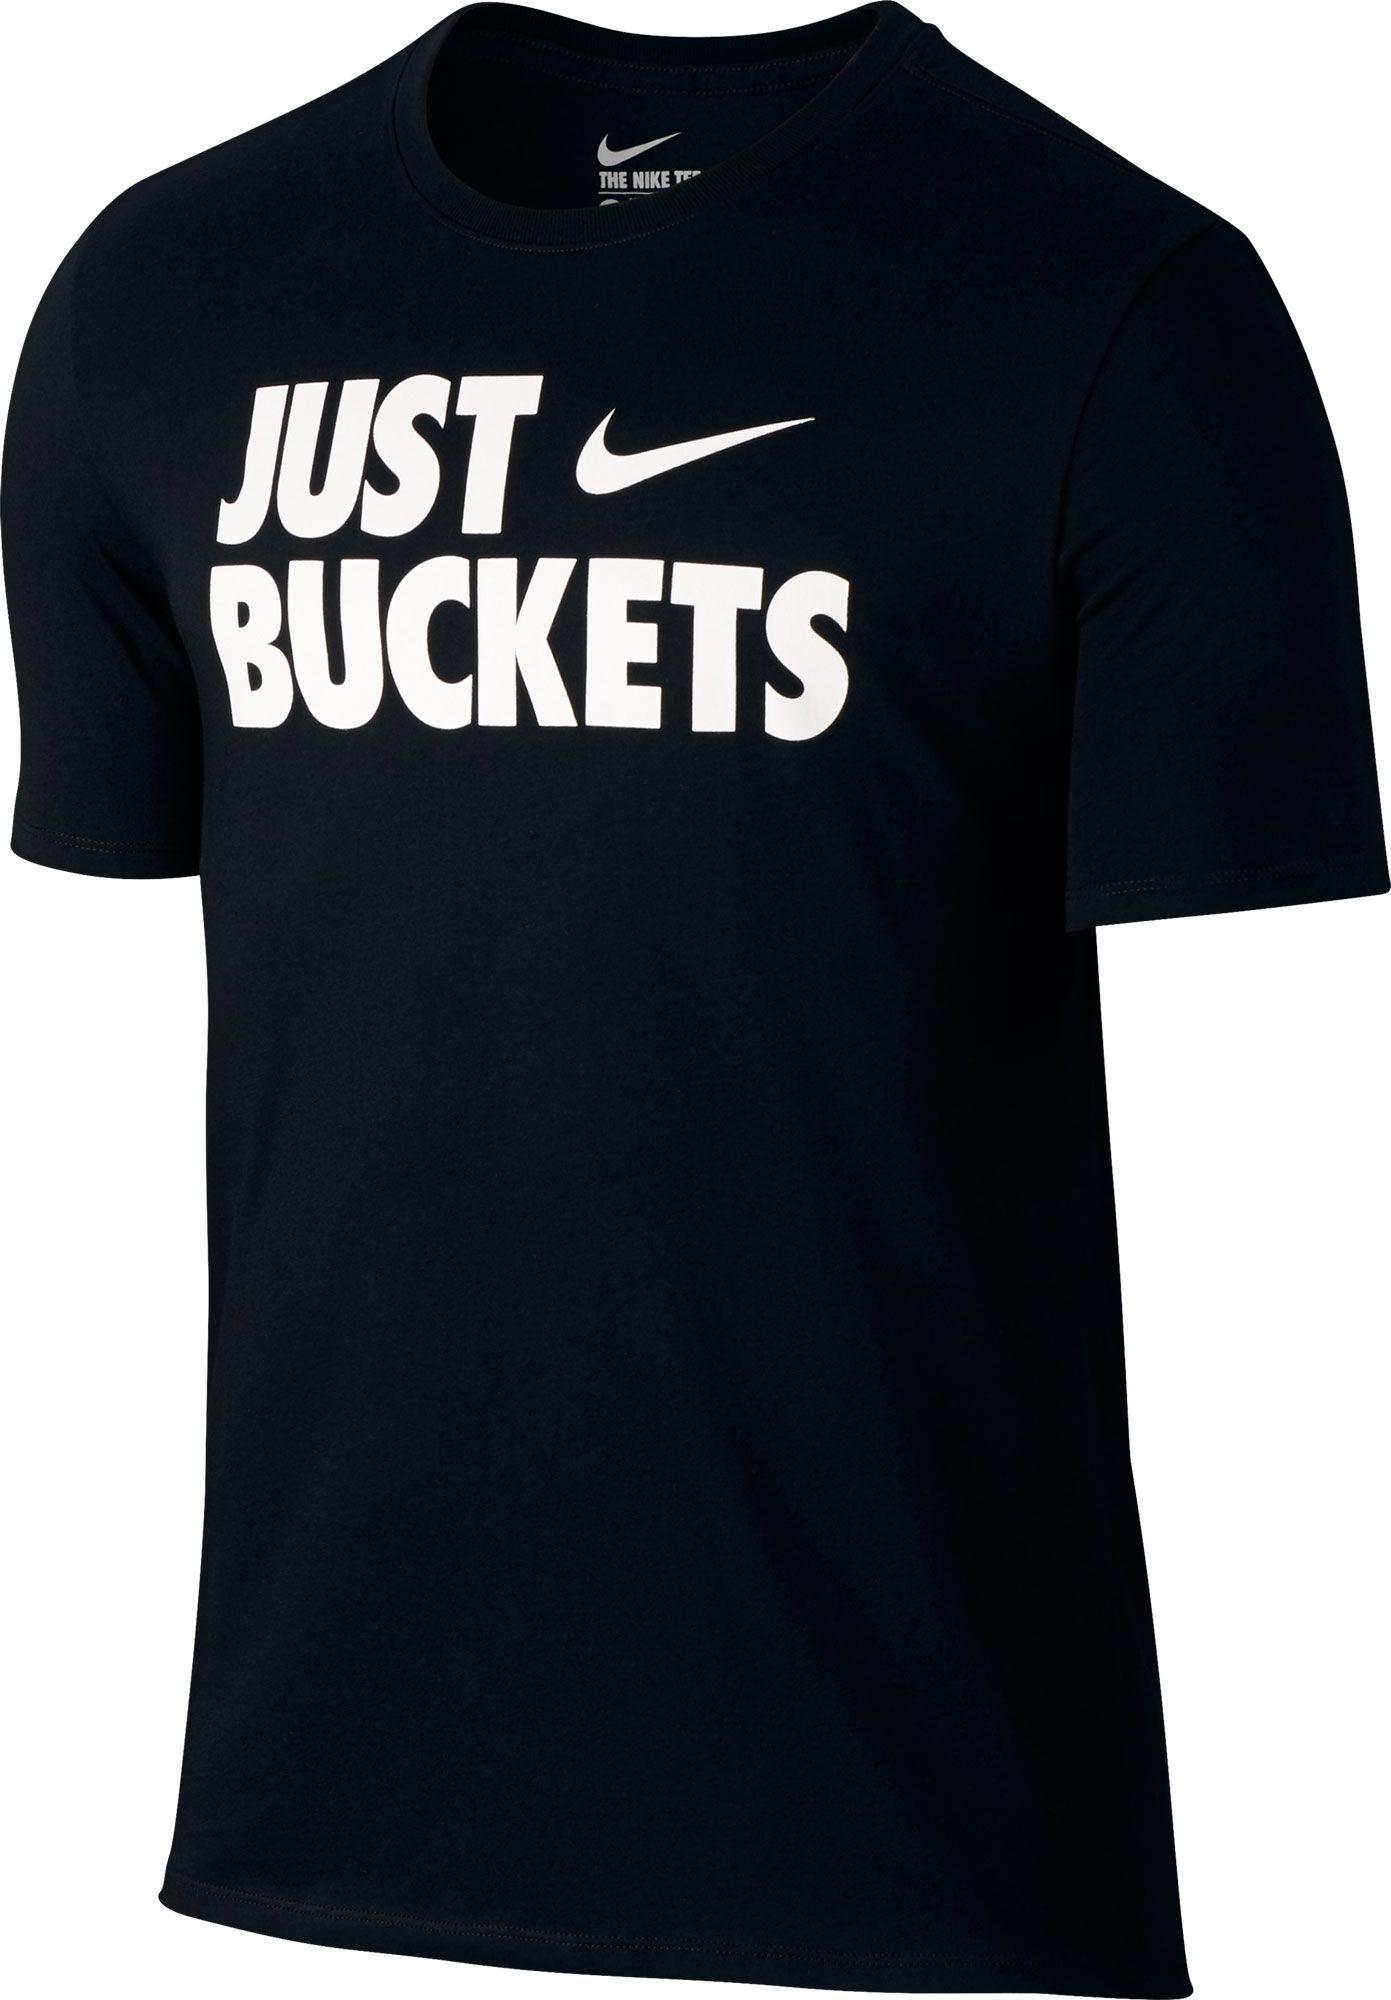 Lyst - Nike Core Verbiage Just Buckets Graphic Basketball T-shirt in ...